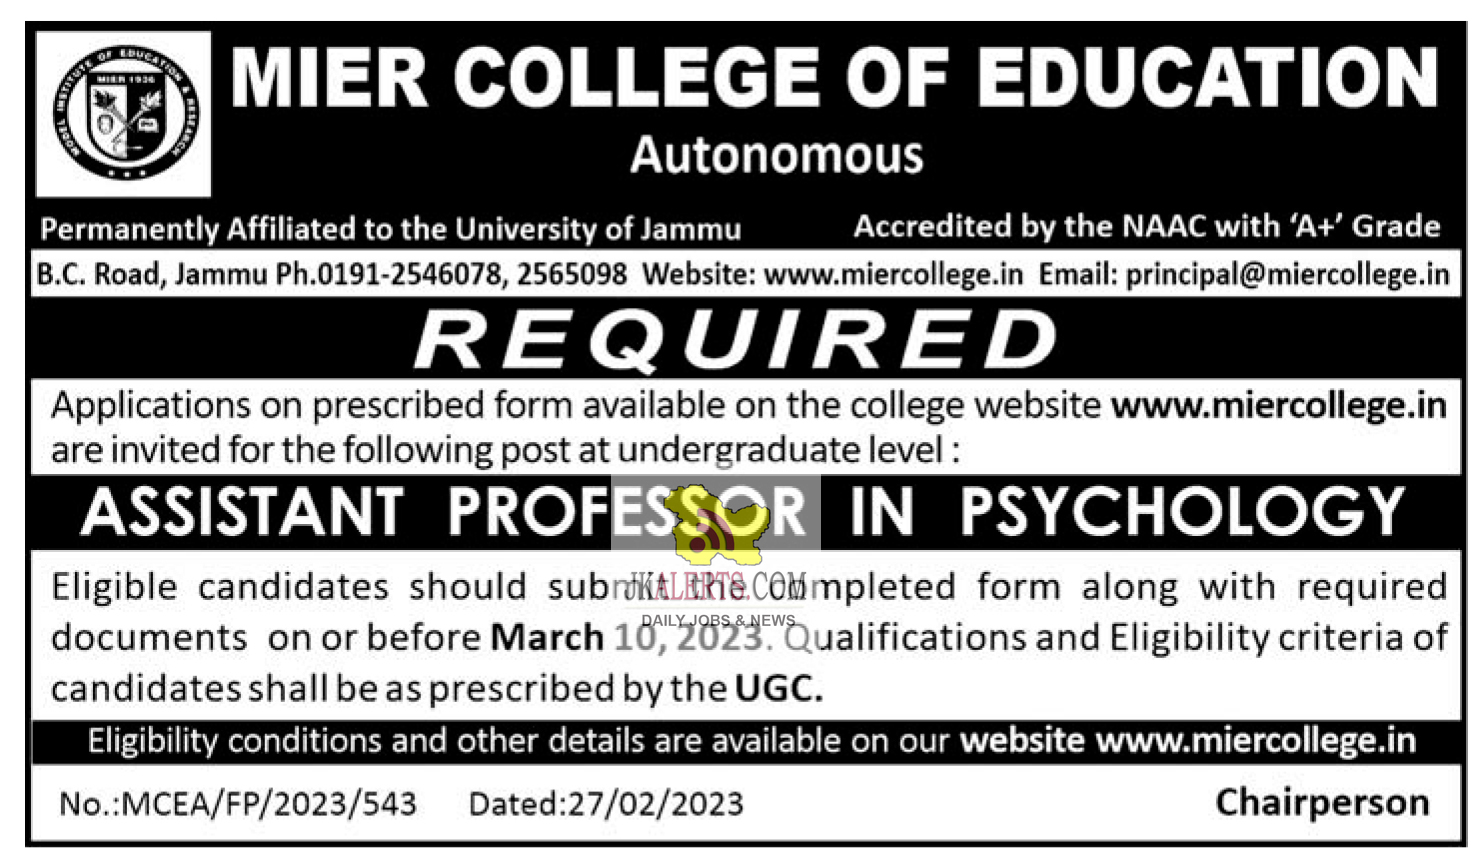 MIER College of Education Job.